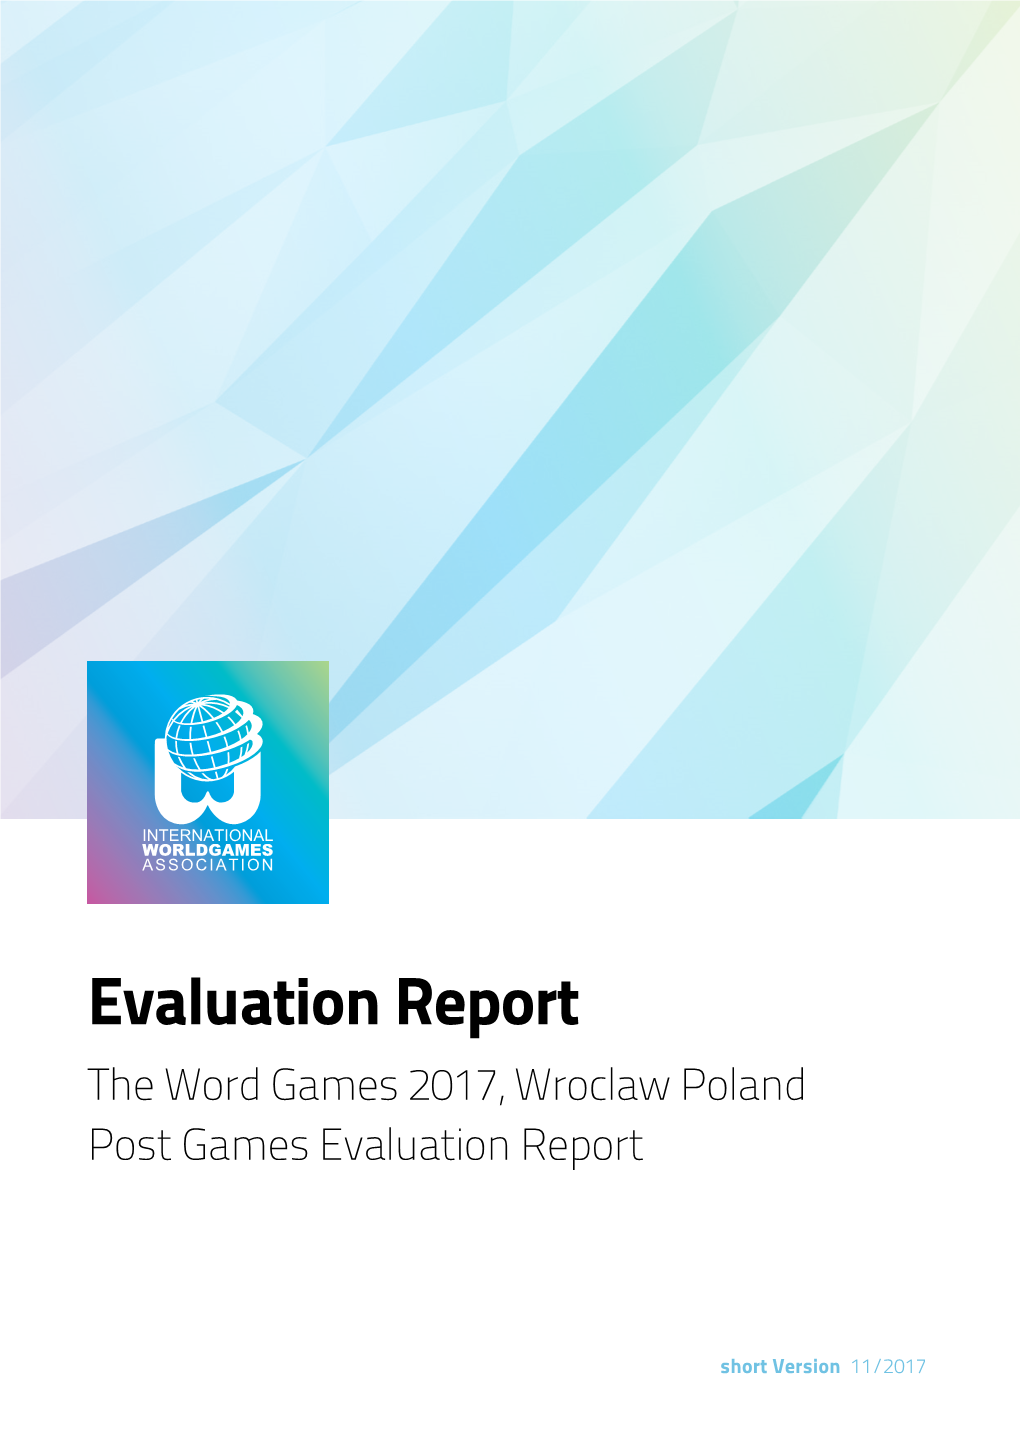 Evaluation Report the Word Games 2017, Wroclaw Poland Post Games Evaluation Report